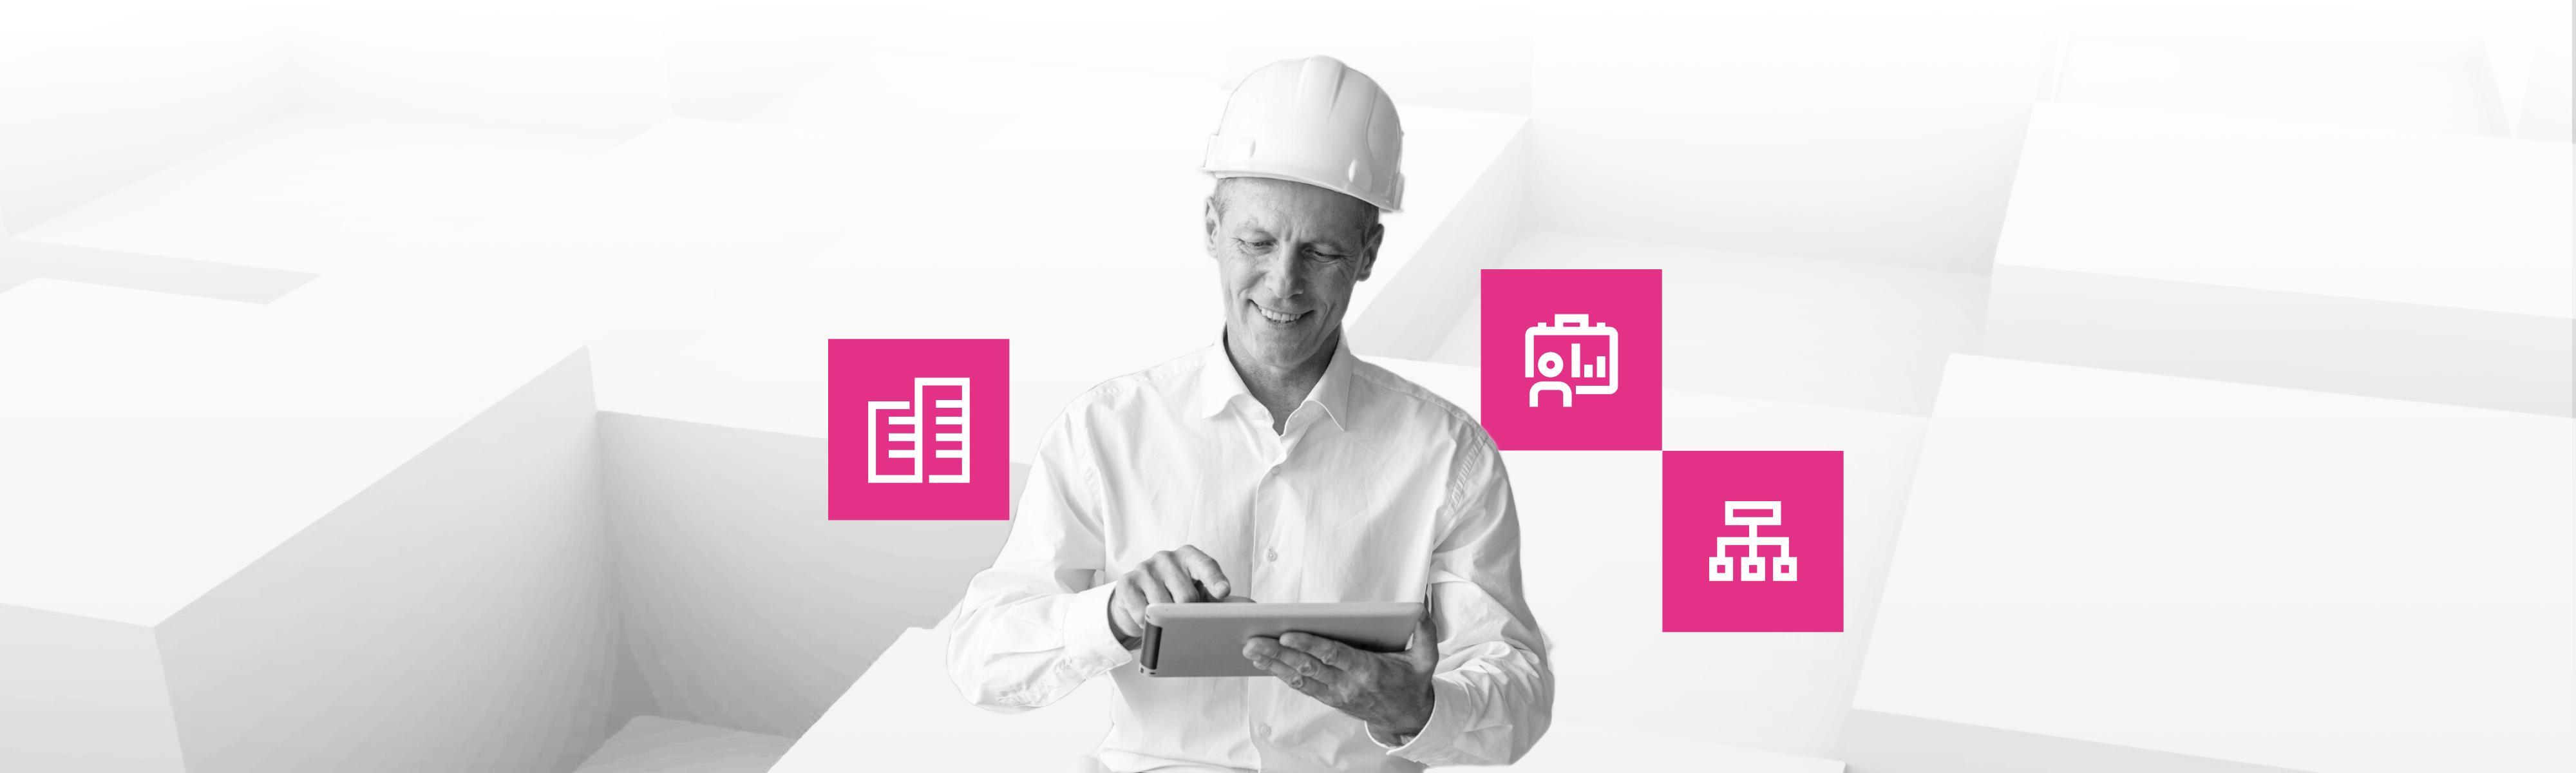 How to Connect Construction Operations with an ERP System